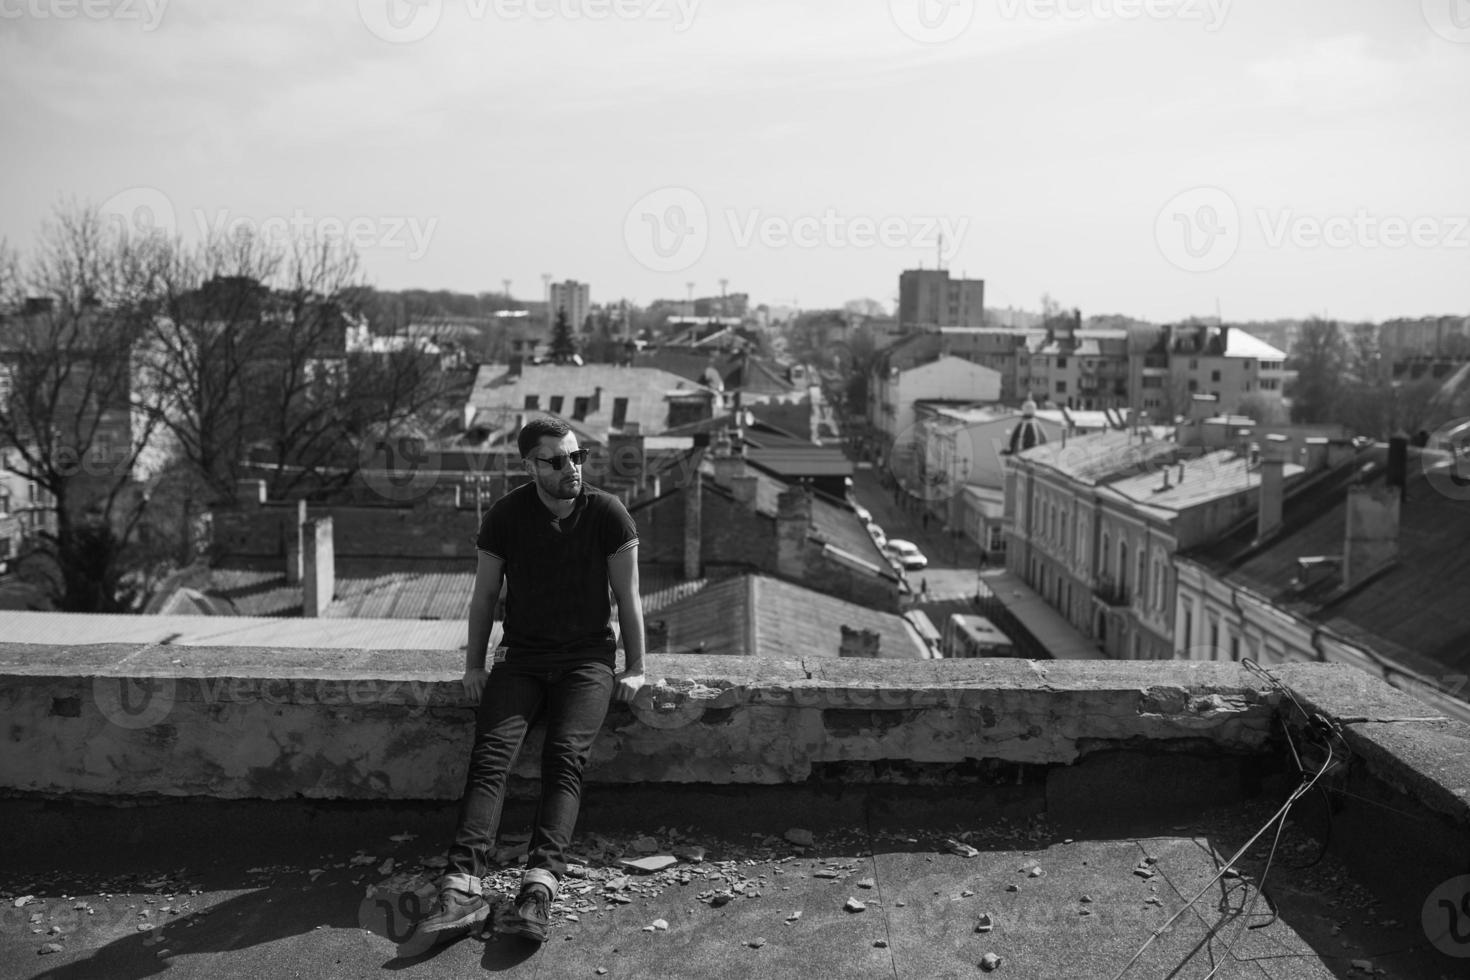 The man in the authentic boots and jeans selvedge on the roof of the building in the old town photo